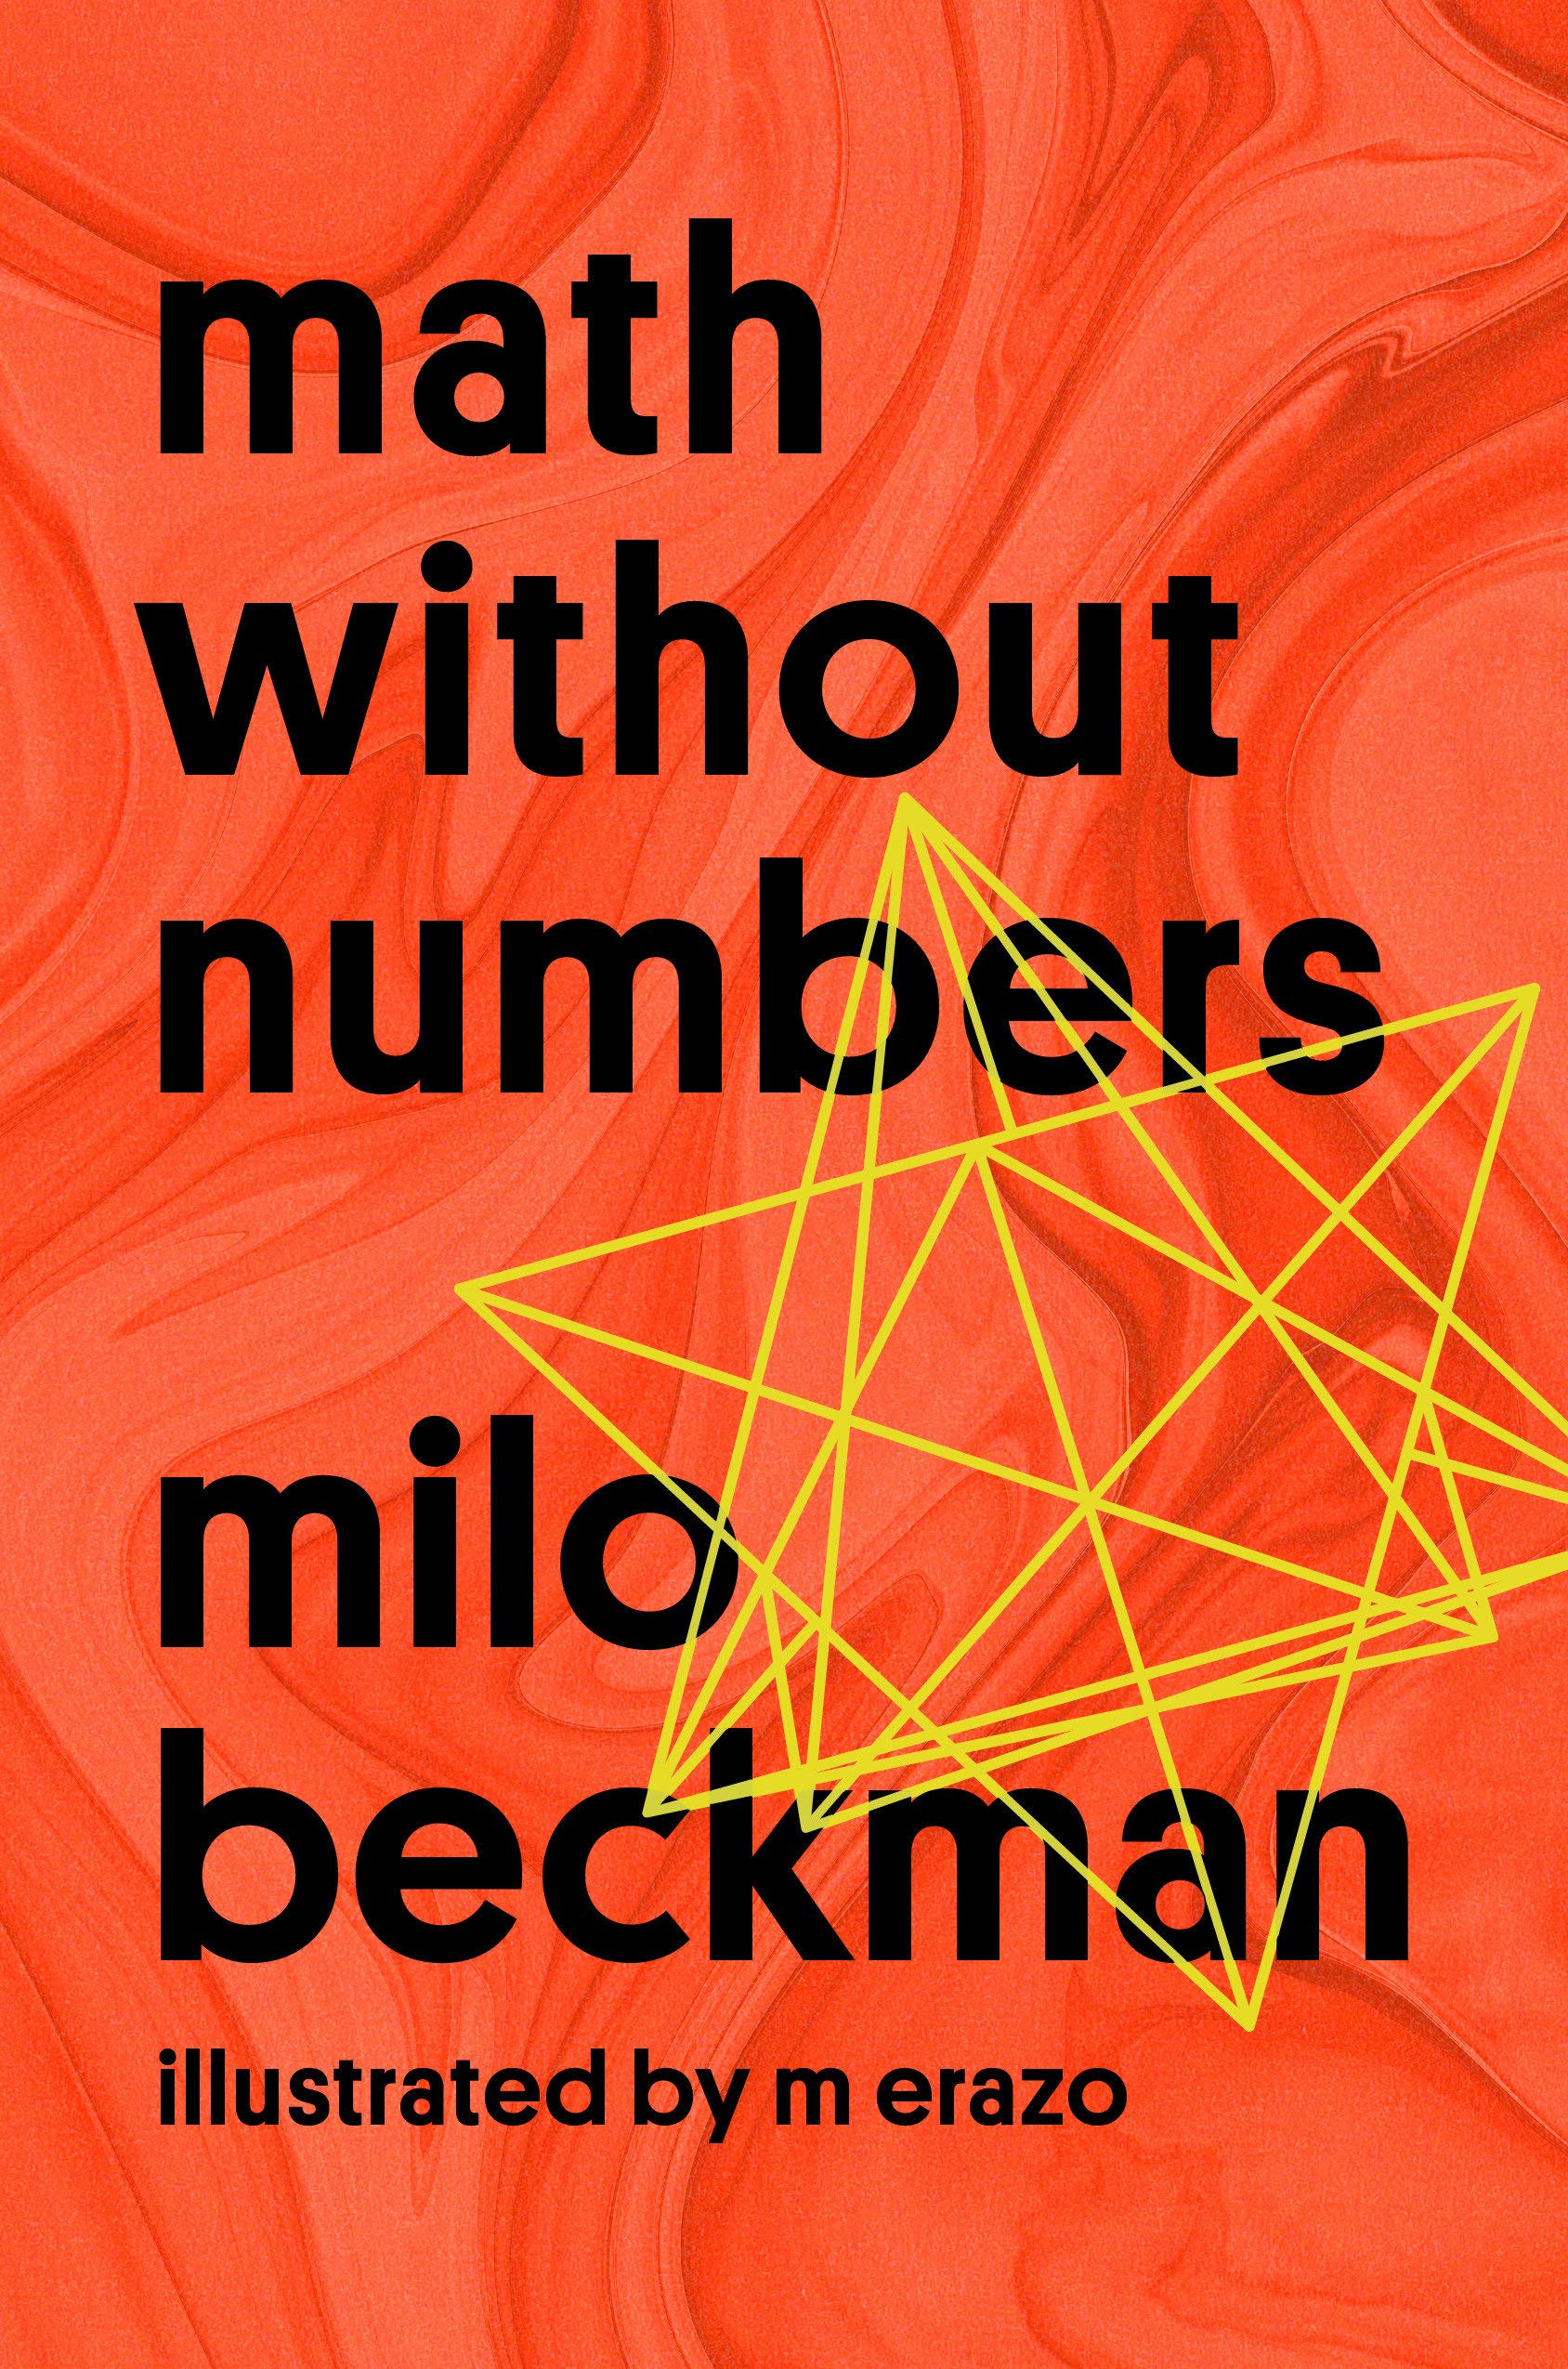 math-without-numbers-portland-book-review